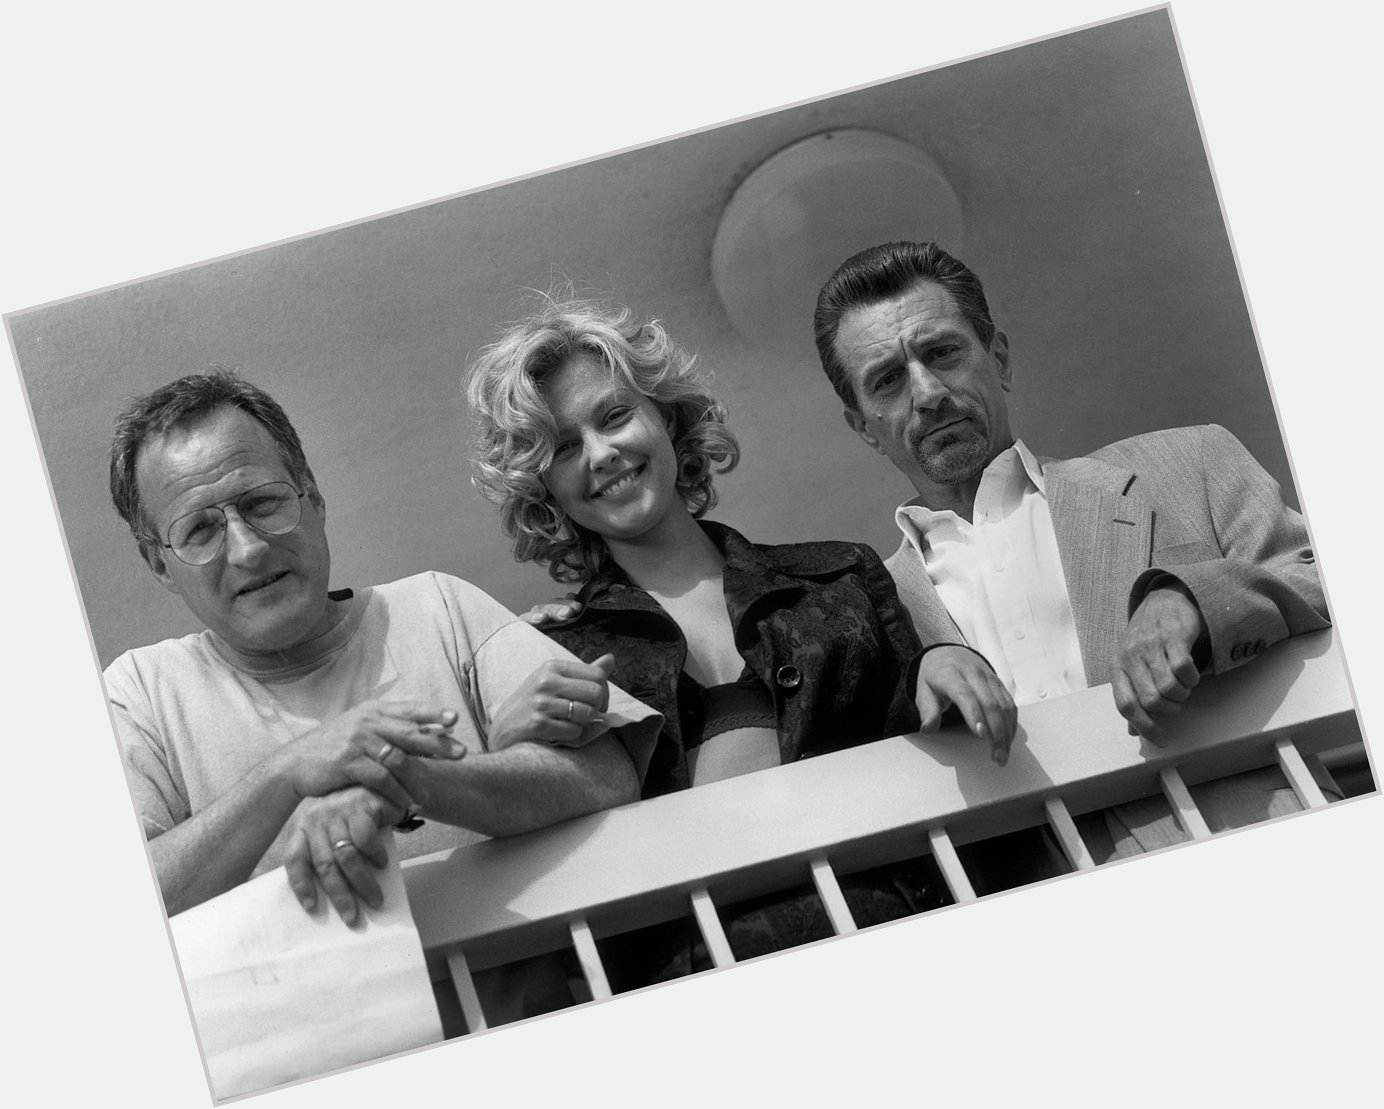 Happy 75th Birthday Michael Mann! Here he is with Ashley Judd and Robert De Niro on the set of 1995 s Heat 